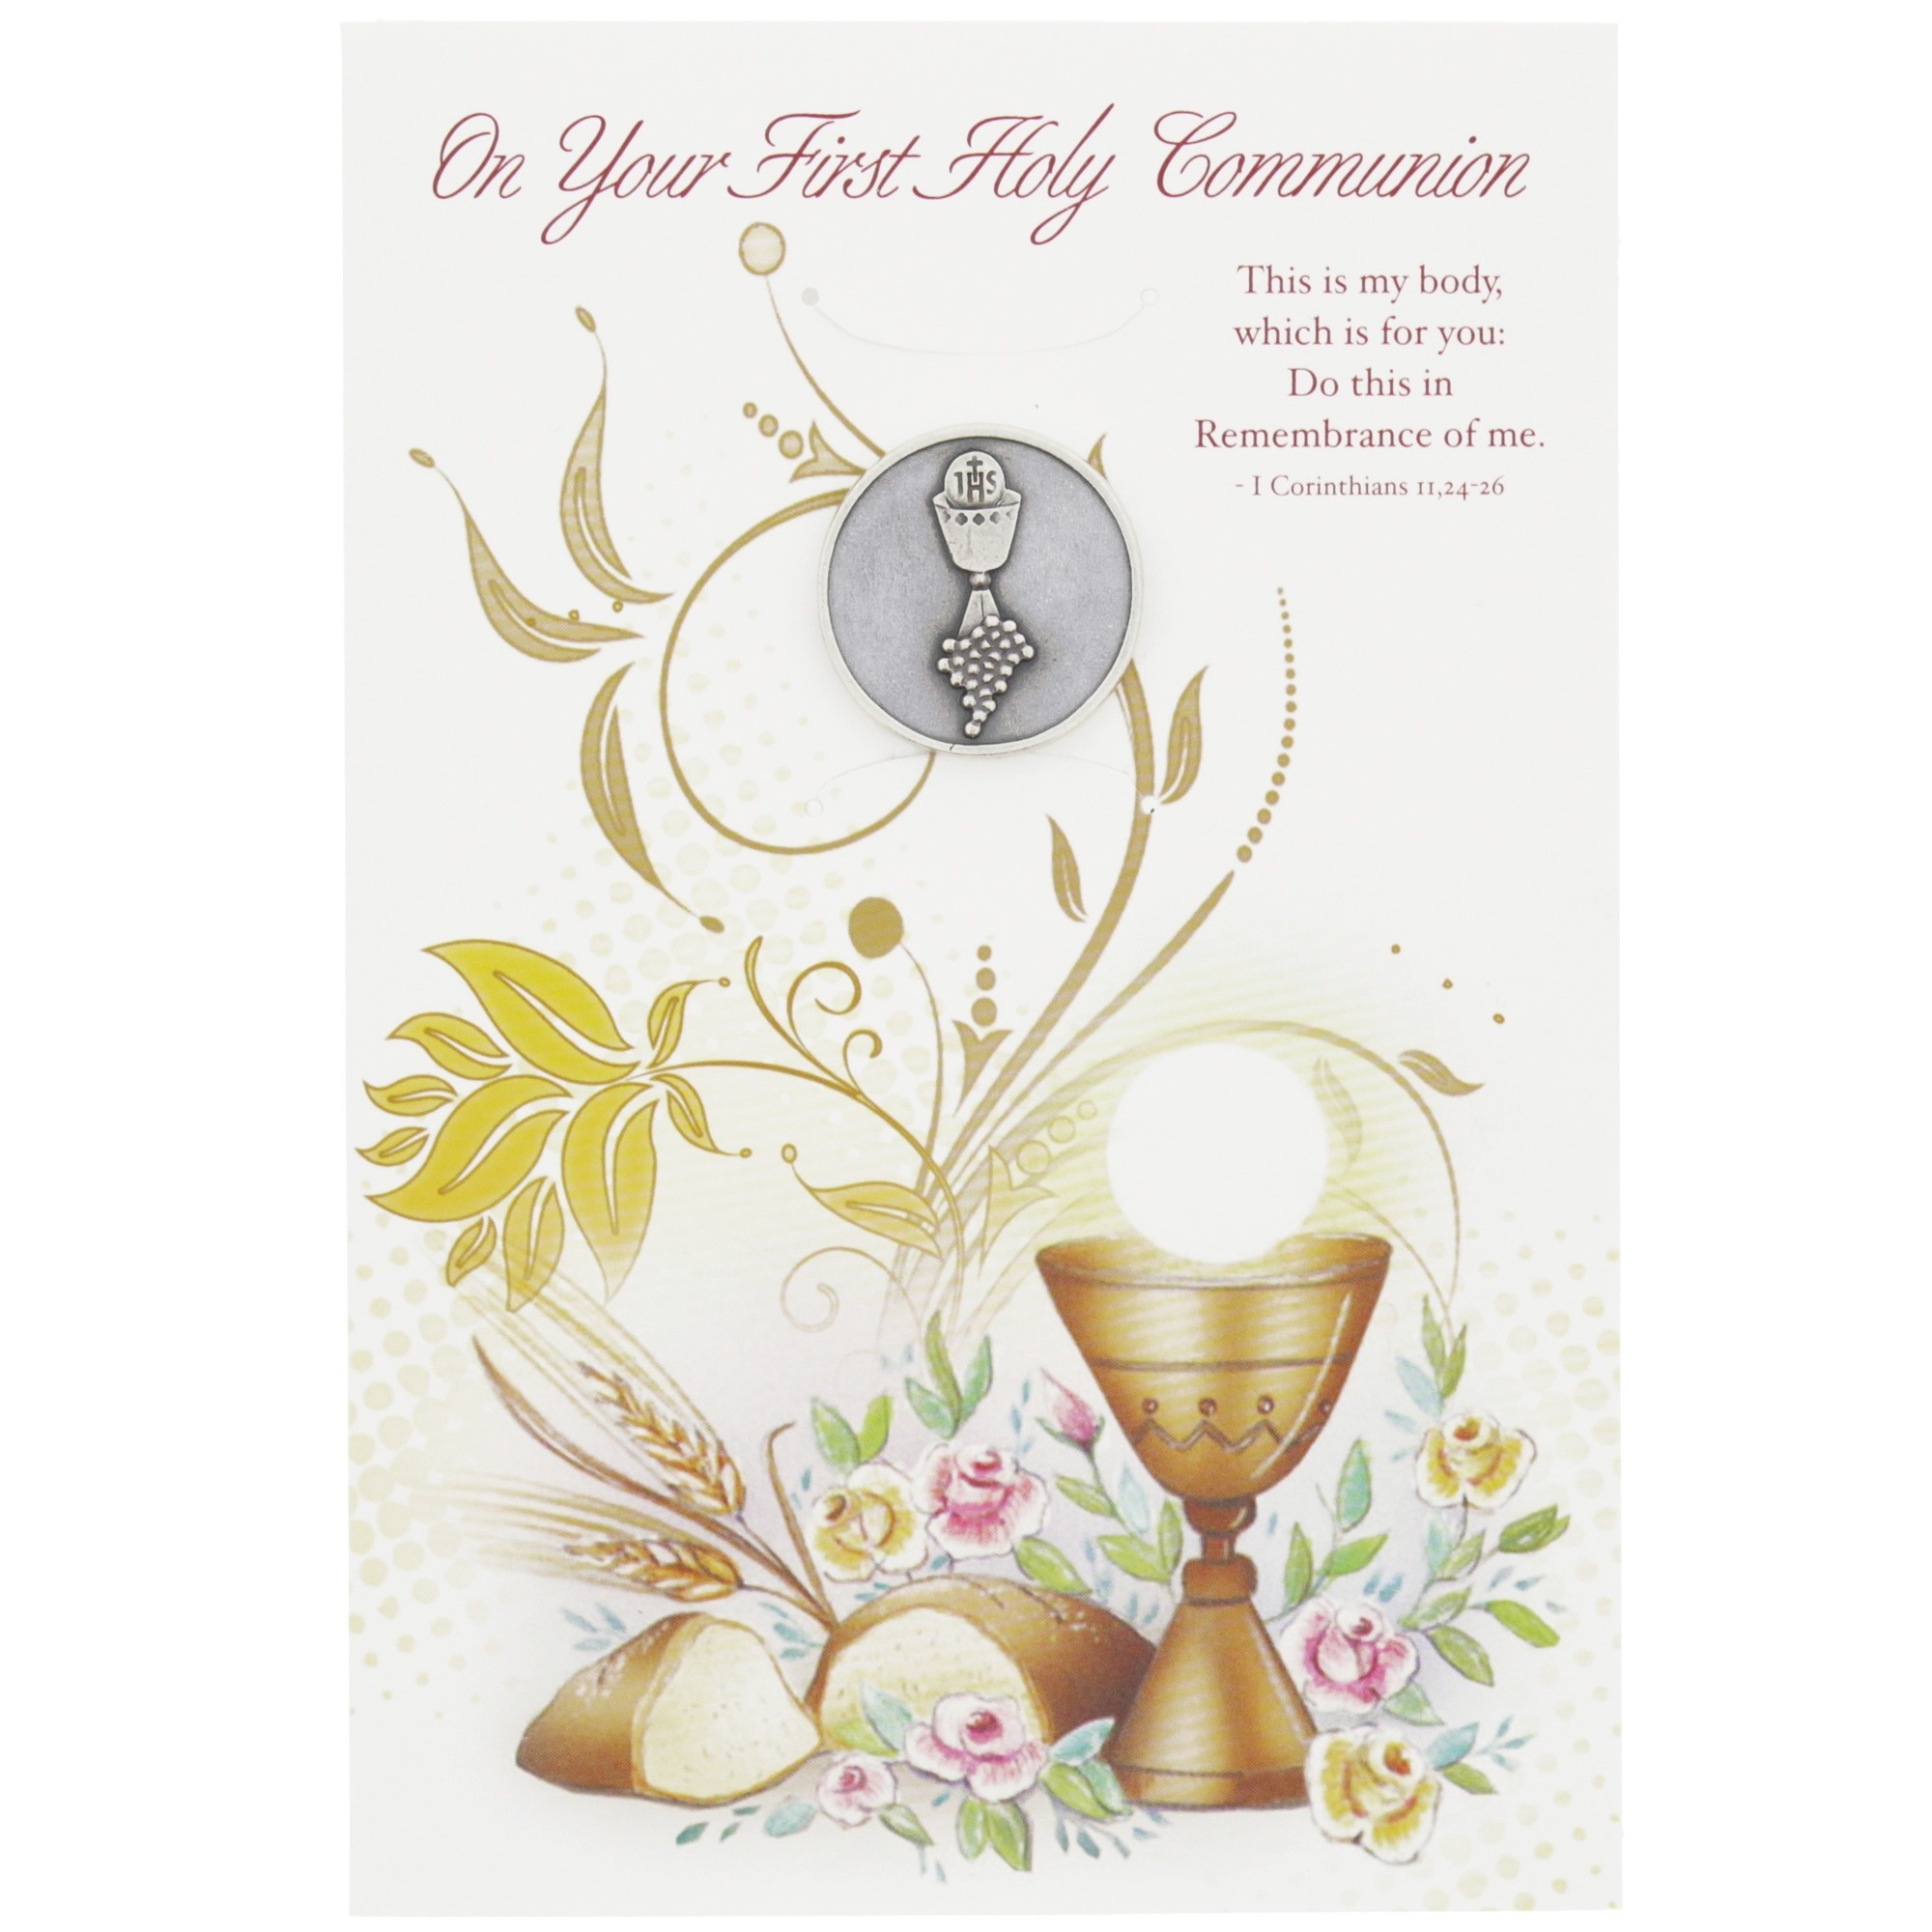 First Holy Communion Cards Printable Free Free Printable